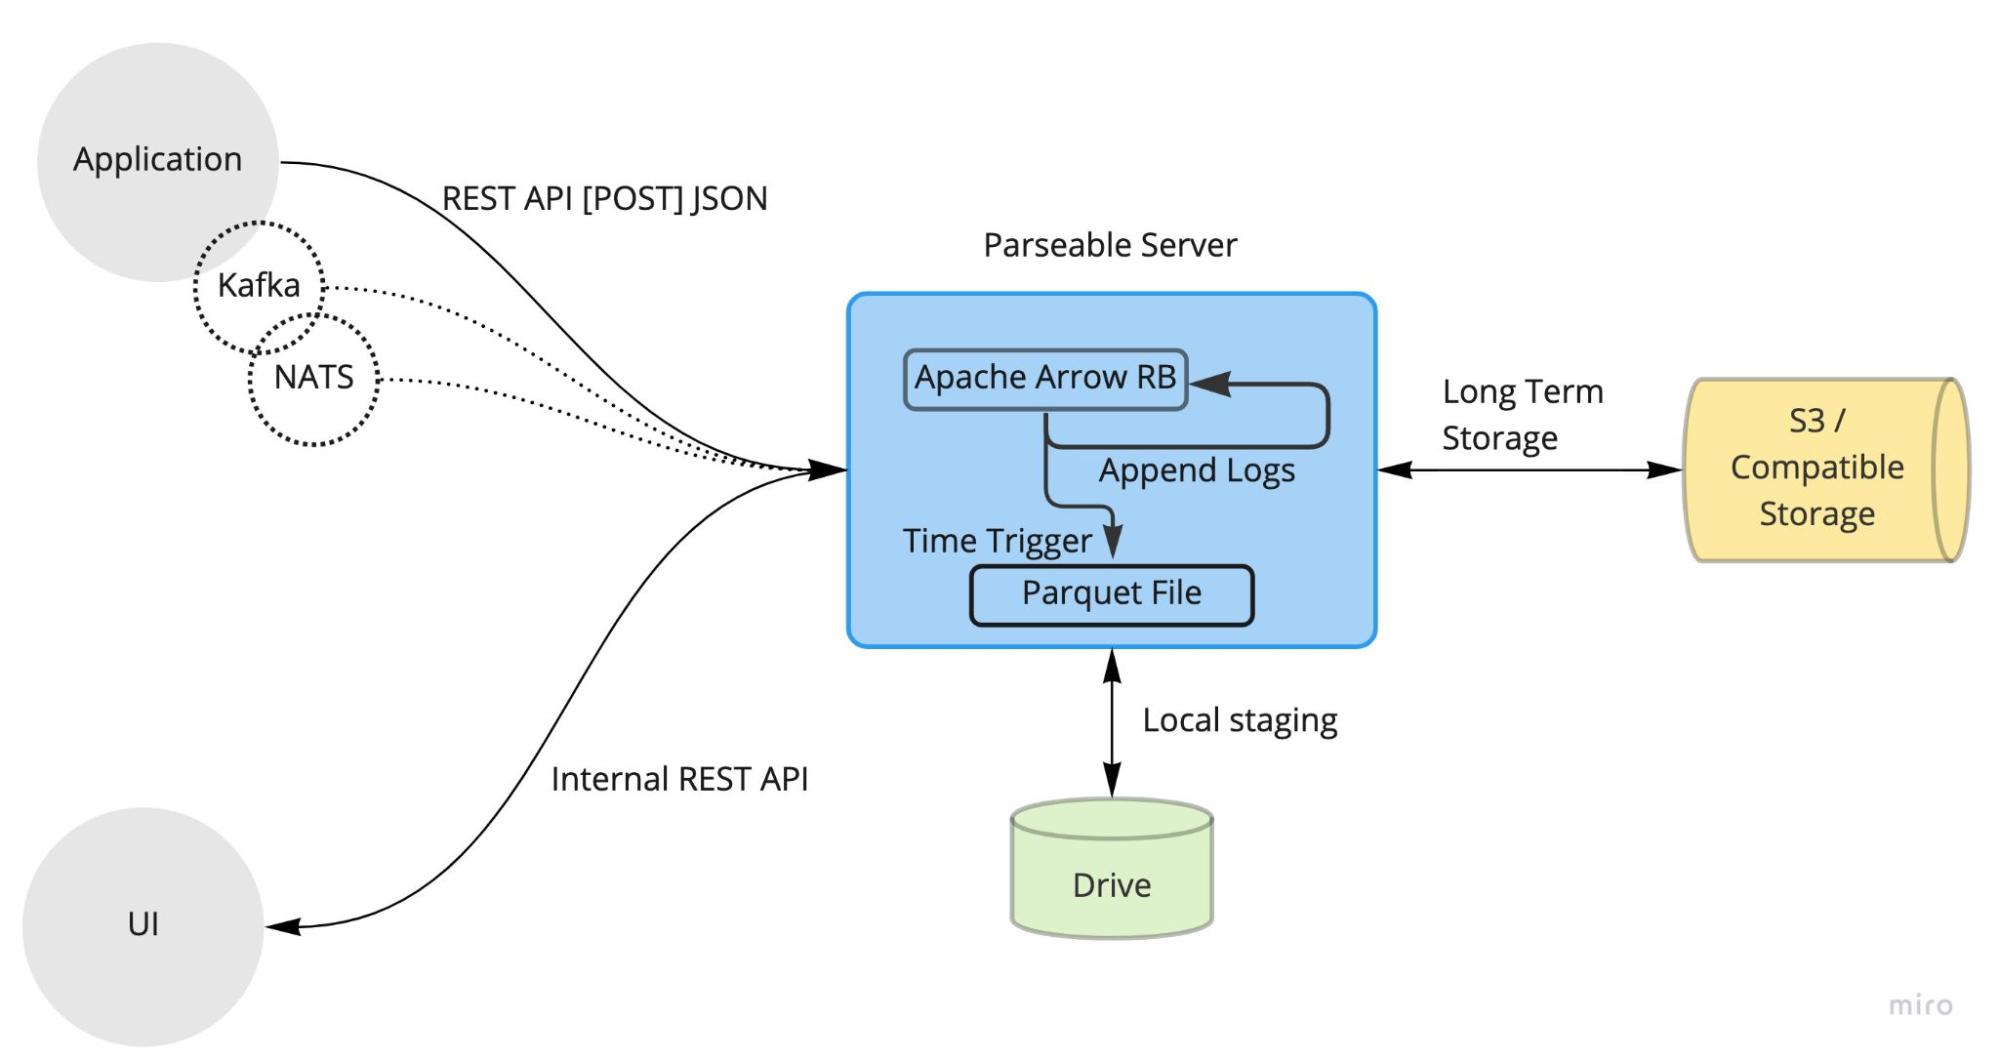 Graph displaying parseable server architecture.